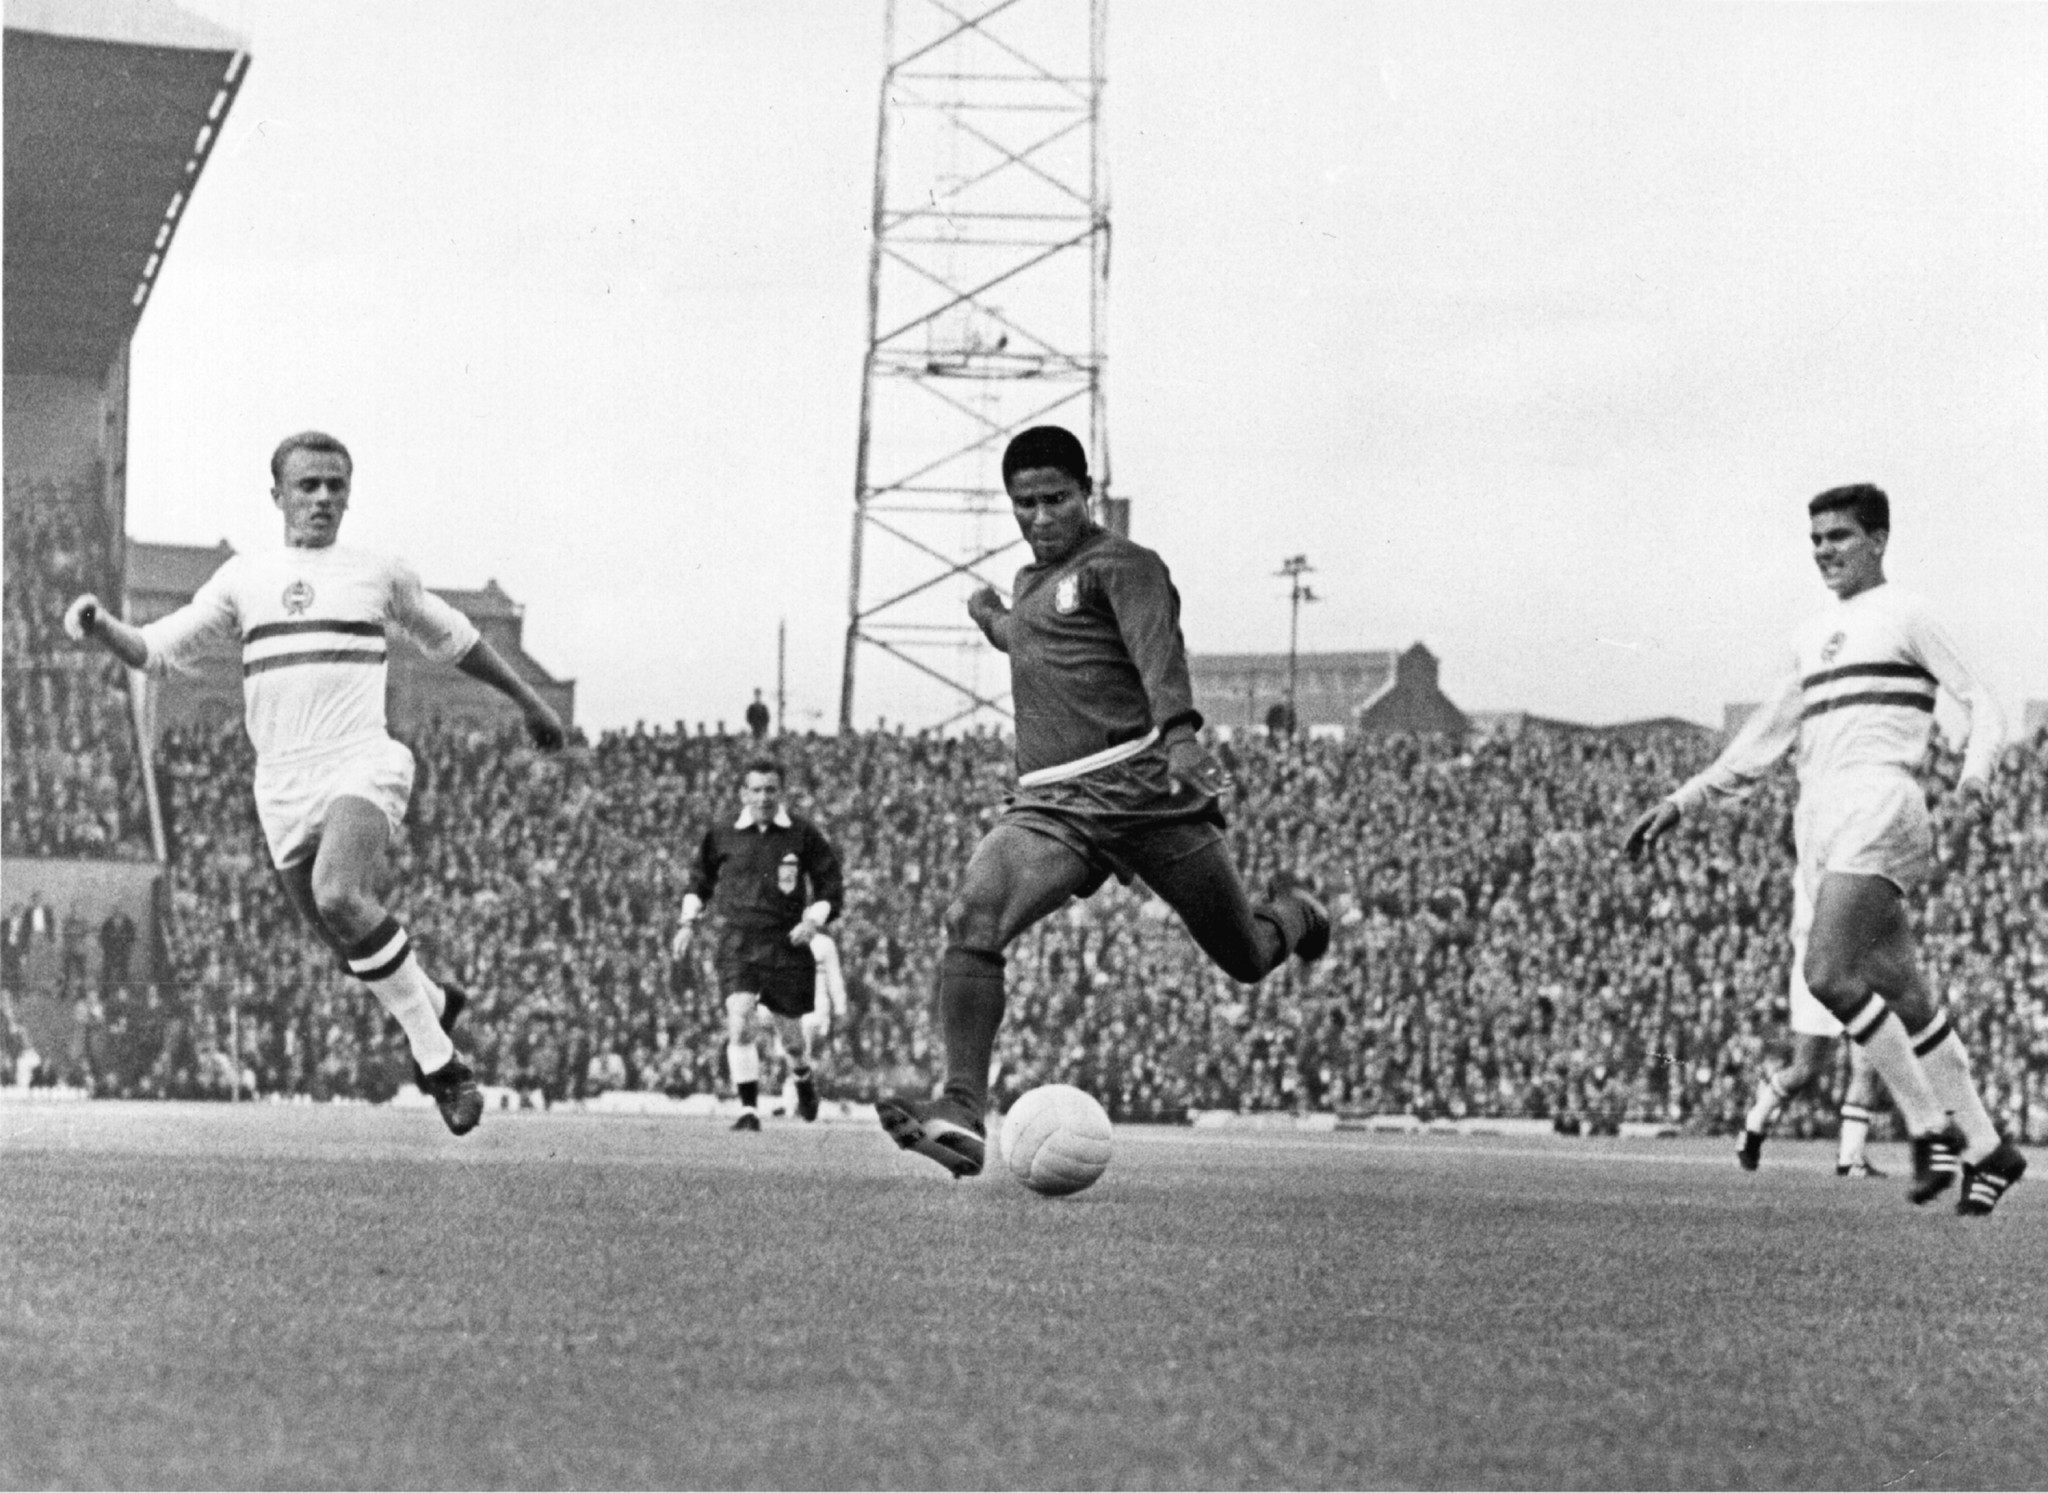 Football legend Eusebio was born in Mozambique but played for Portugal ©Getty Images